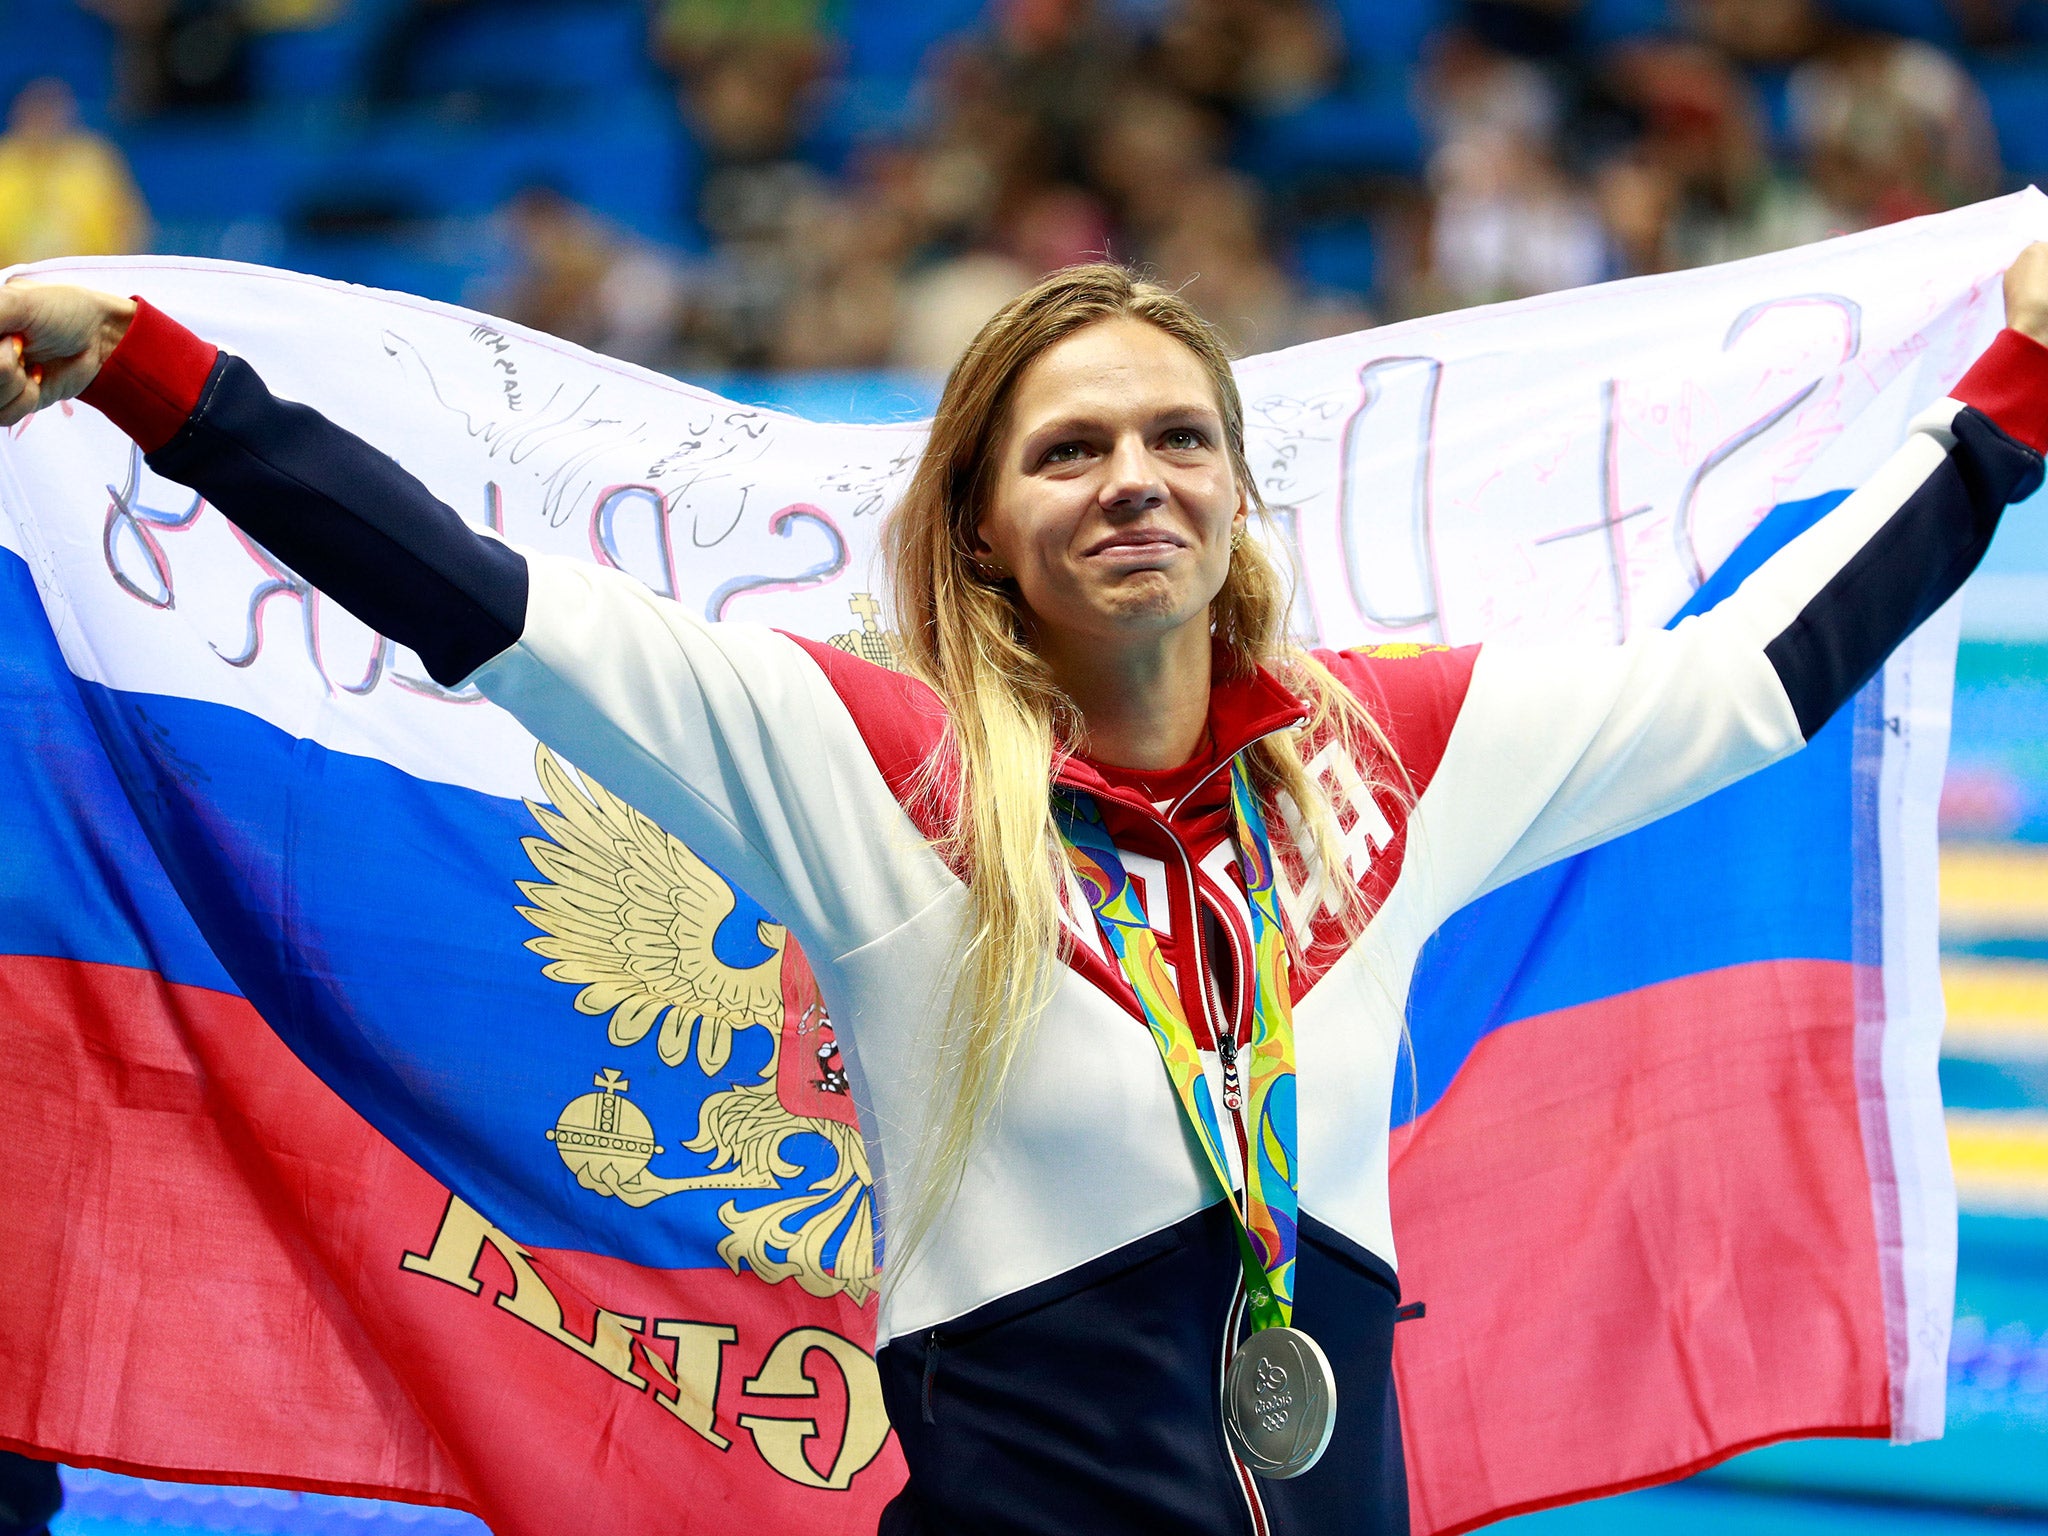 Yulia Efimova has the chance to add a second medal to her Olympic silver from the 100m breaststroke final